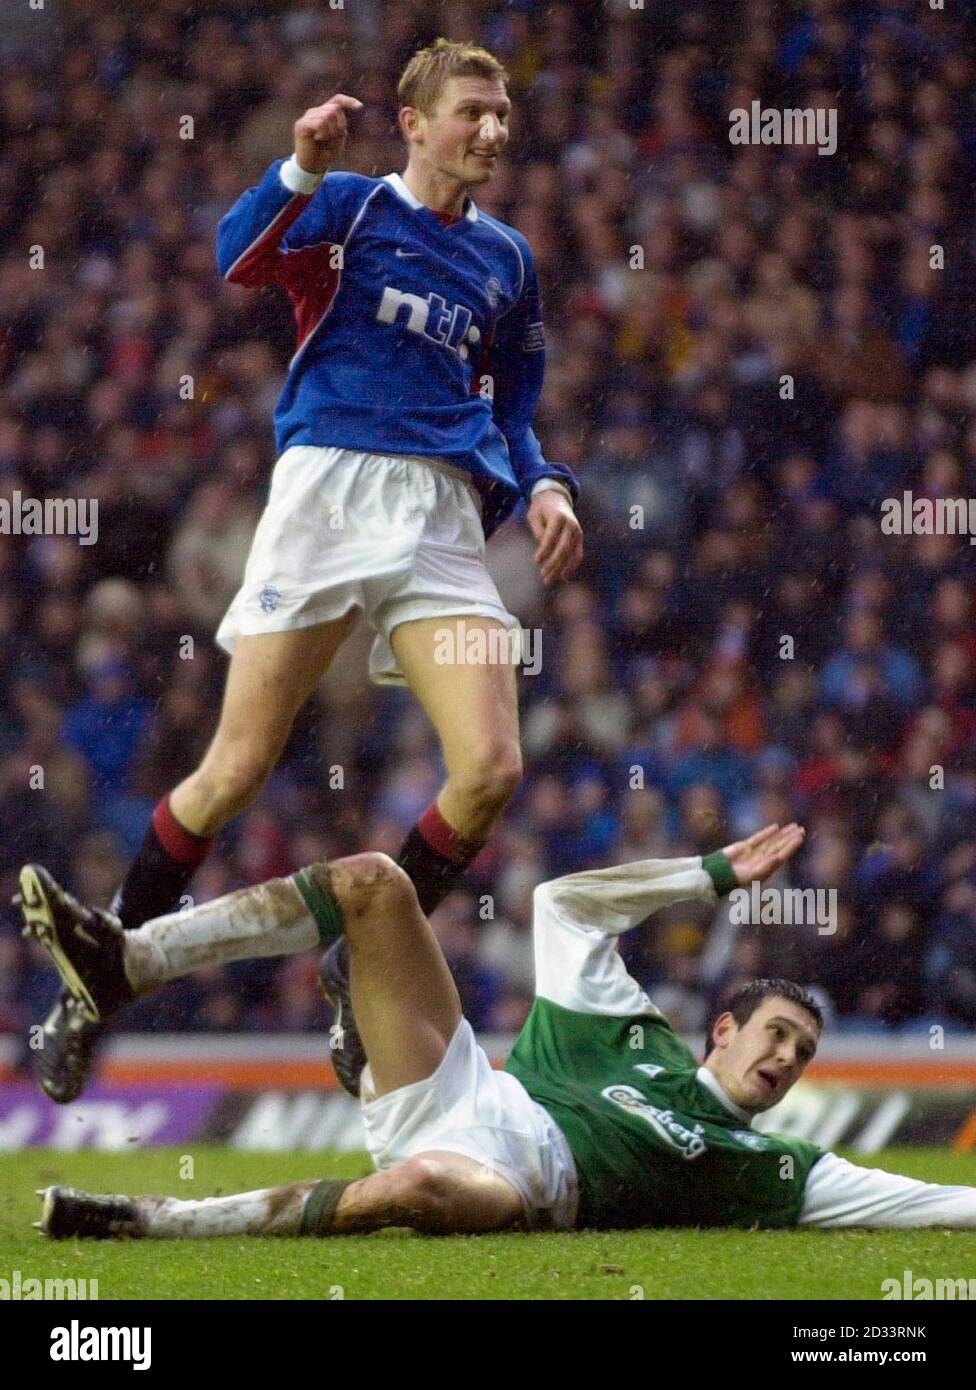 Rangers' Tore Andre Flo celebrates his goal at today's Rangers v Hibernian match in the Scottish Premier League at Glasgow's Ibrox stadium. Stock Photo